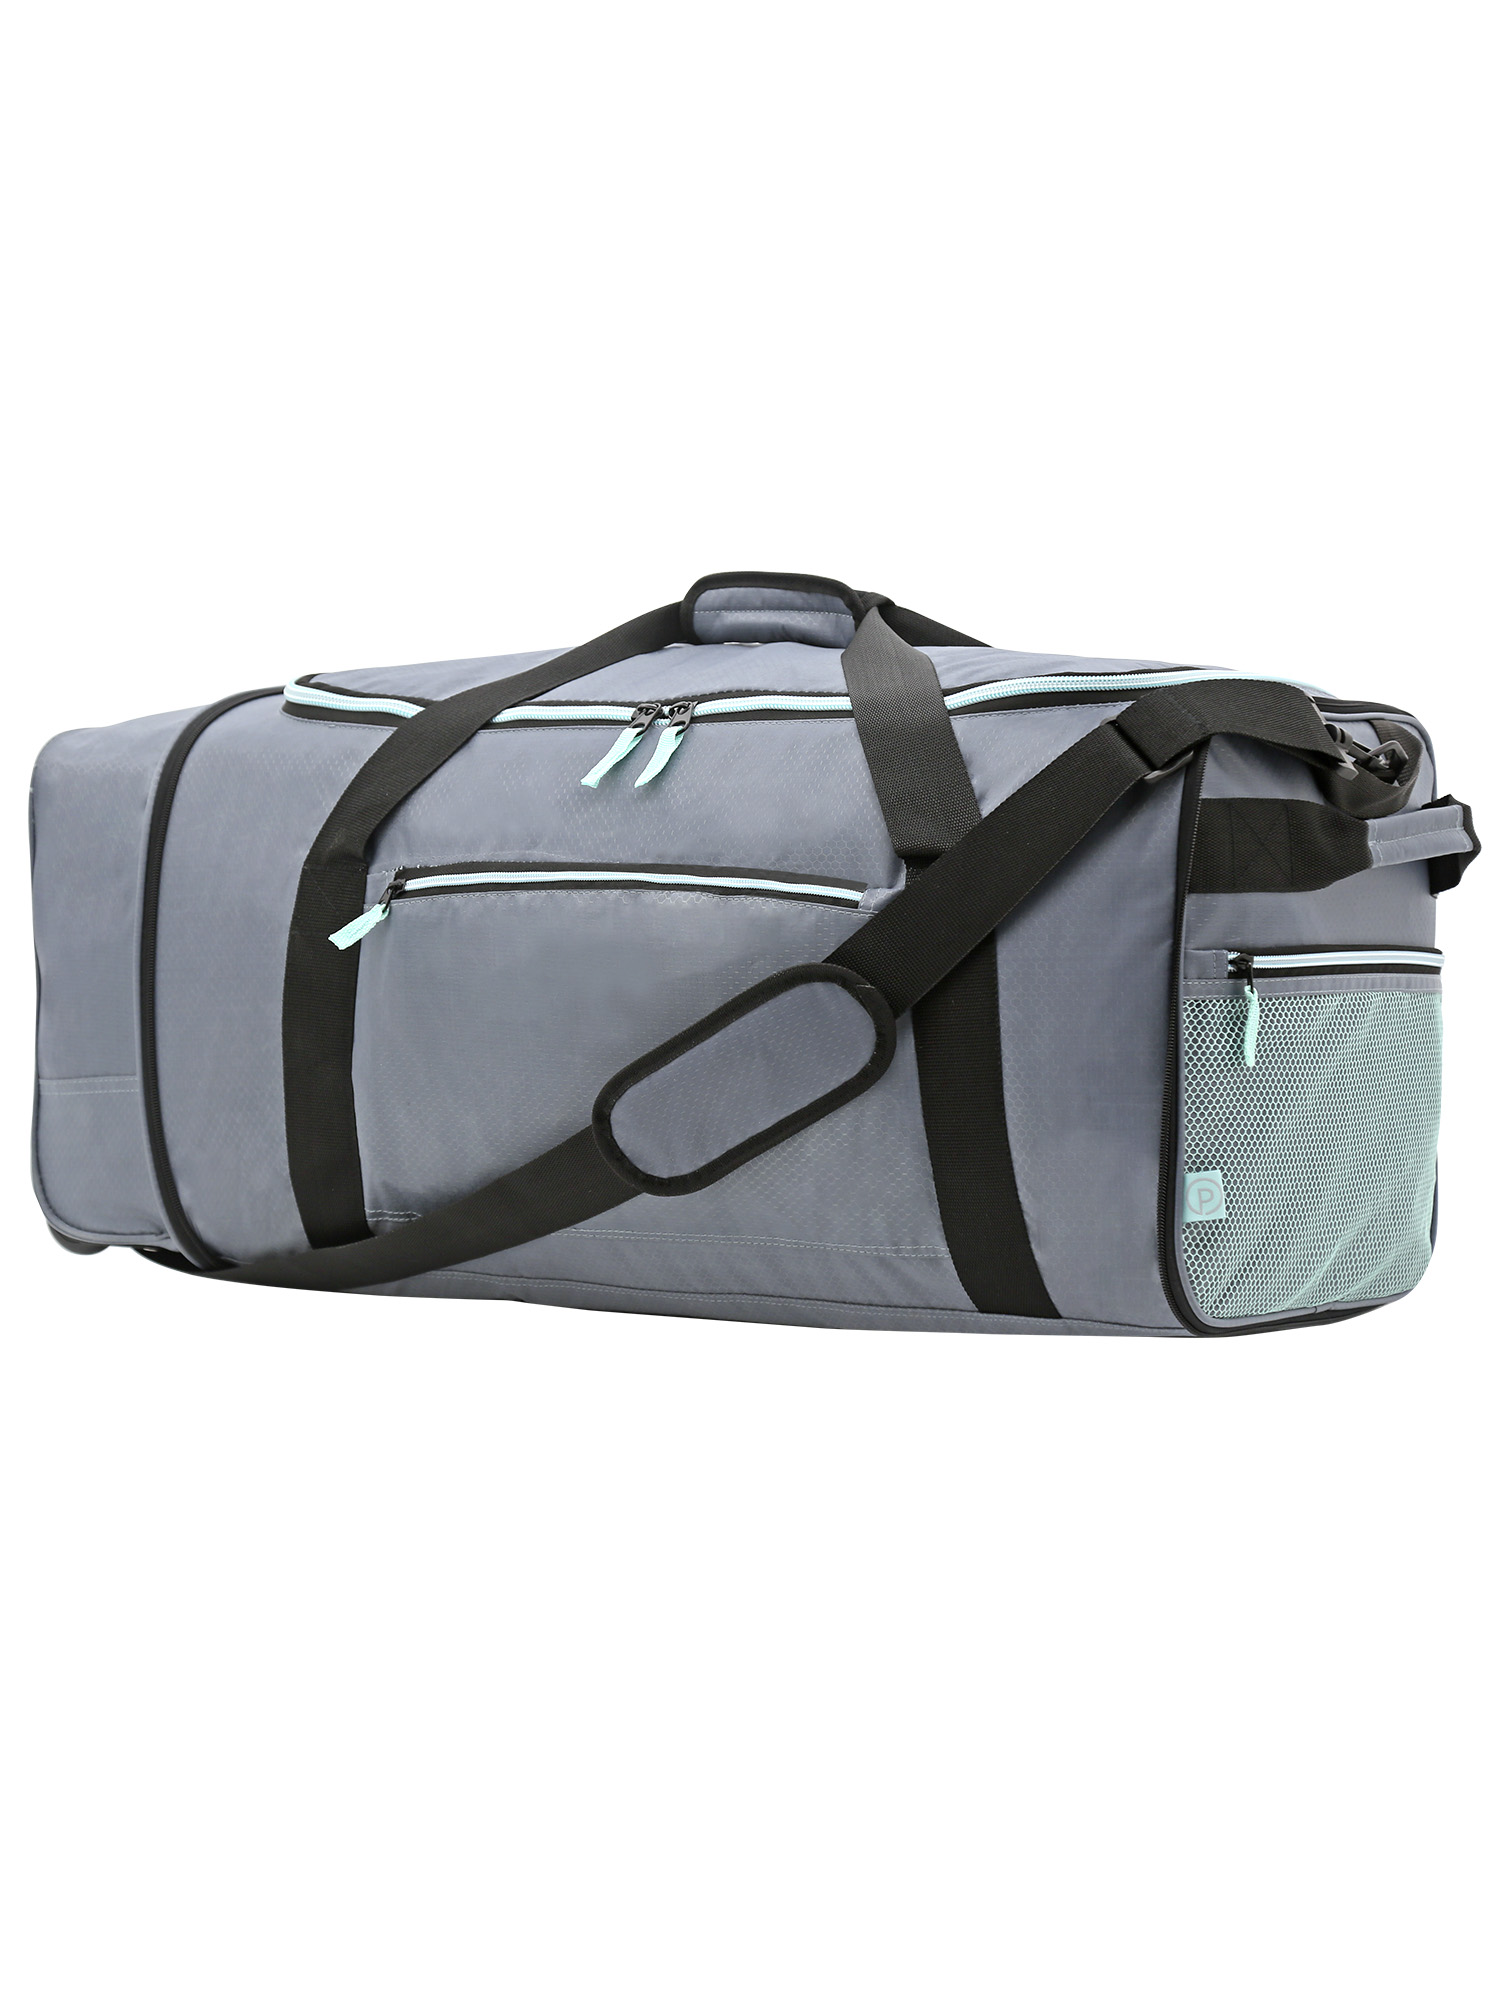 Protégé 32" Compactible Rolling Travel Duffel - Gray - image 1 of 11